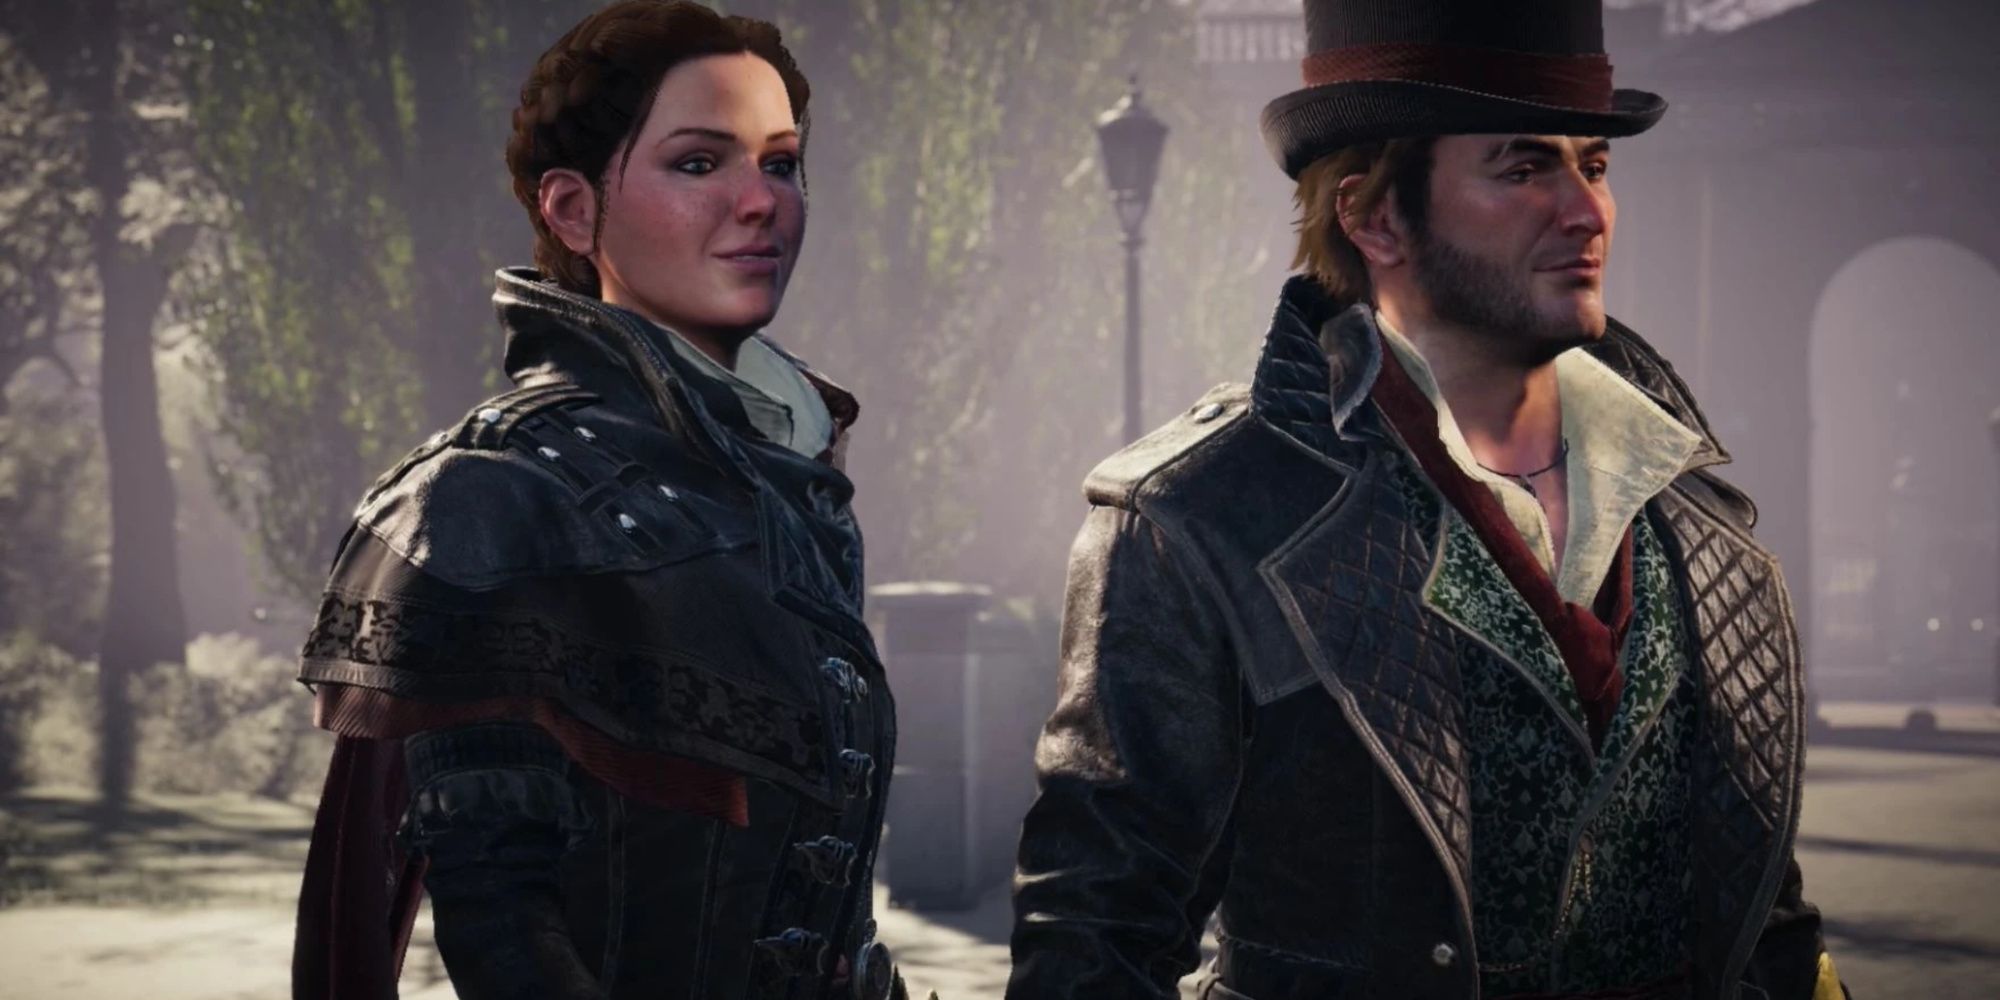 Evie and Jacob in Assassin's Creed Syndicate